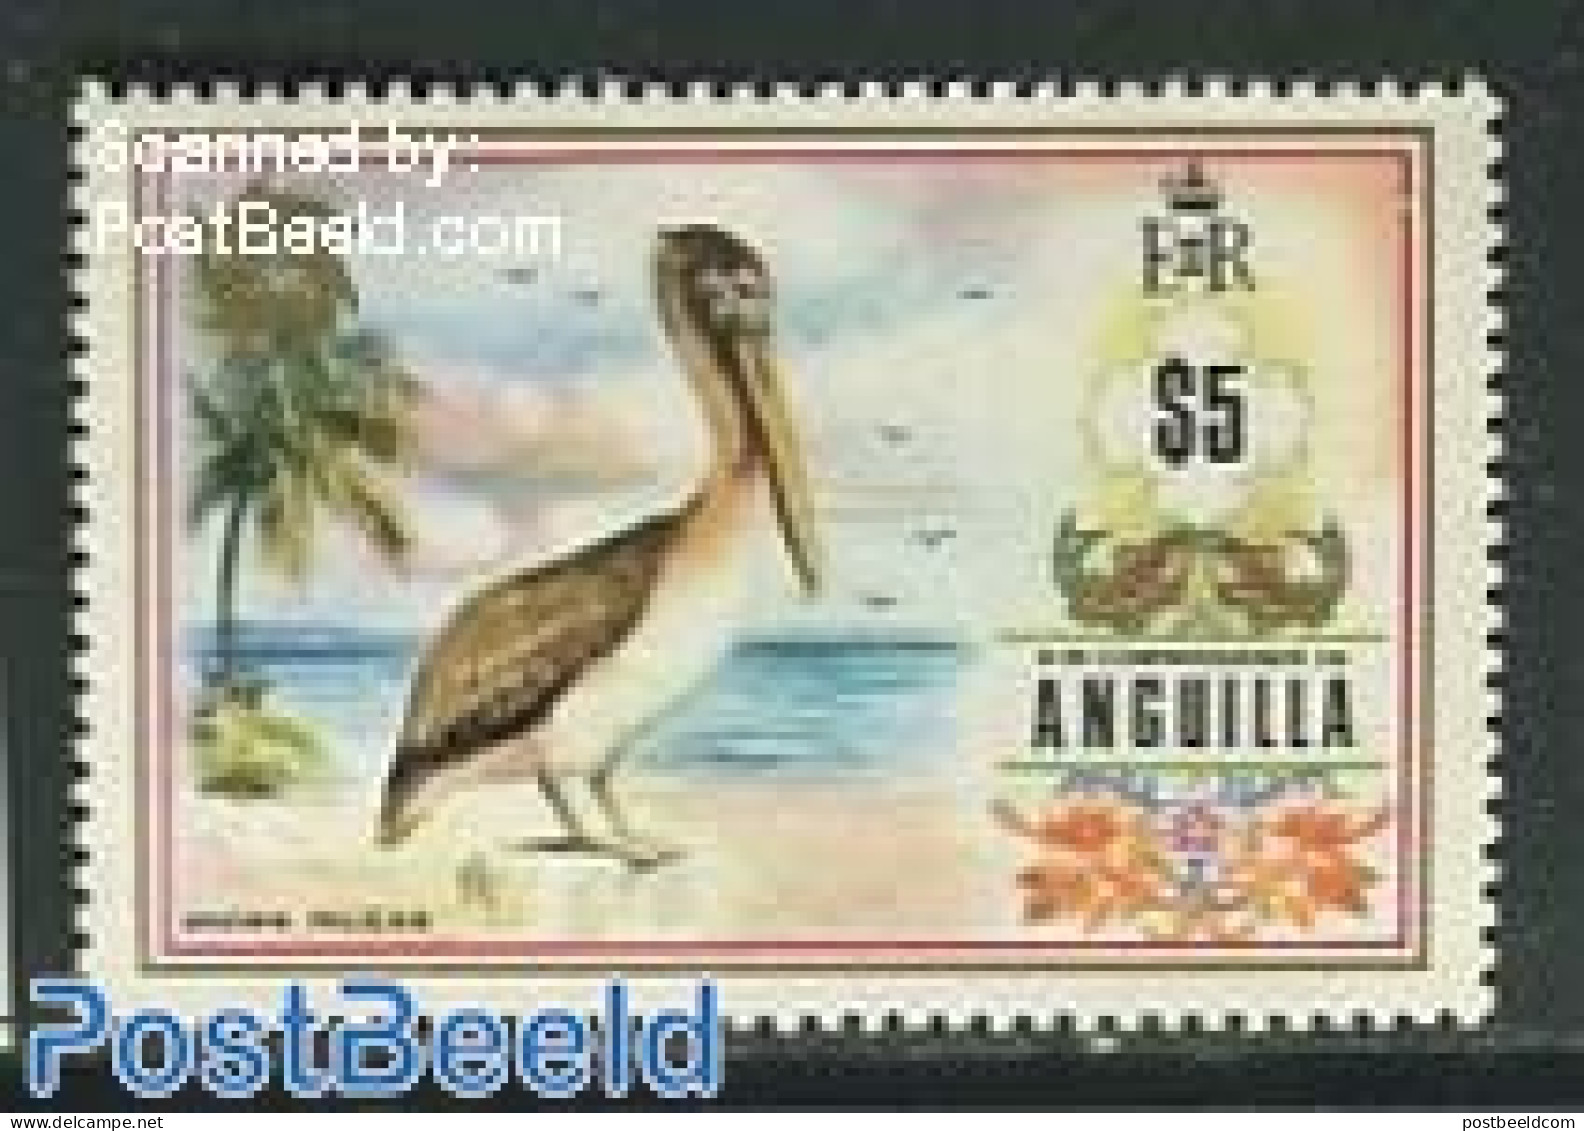 Anguilla 1972 5$, Stamp Out Of Set, Mint NH, Nature - Birds - Anguilla (1968-...)